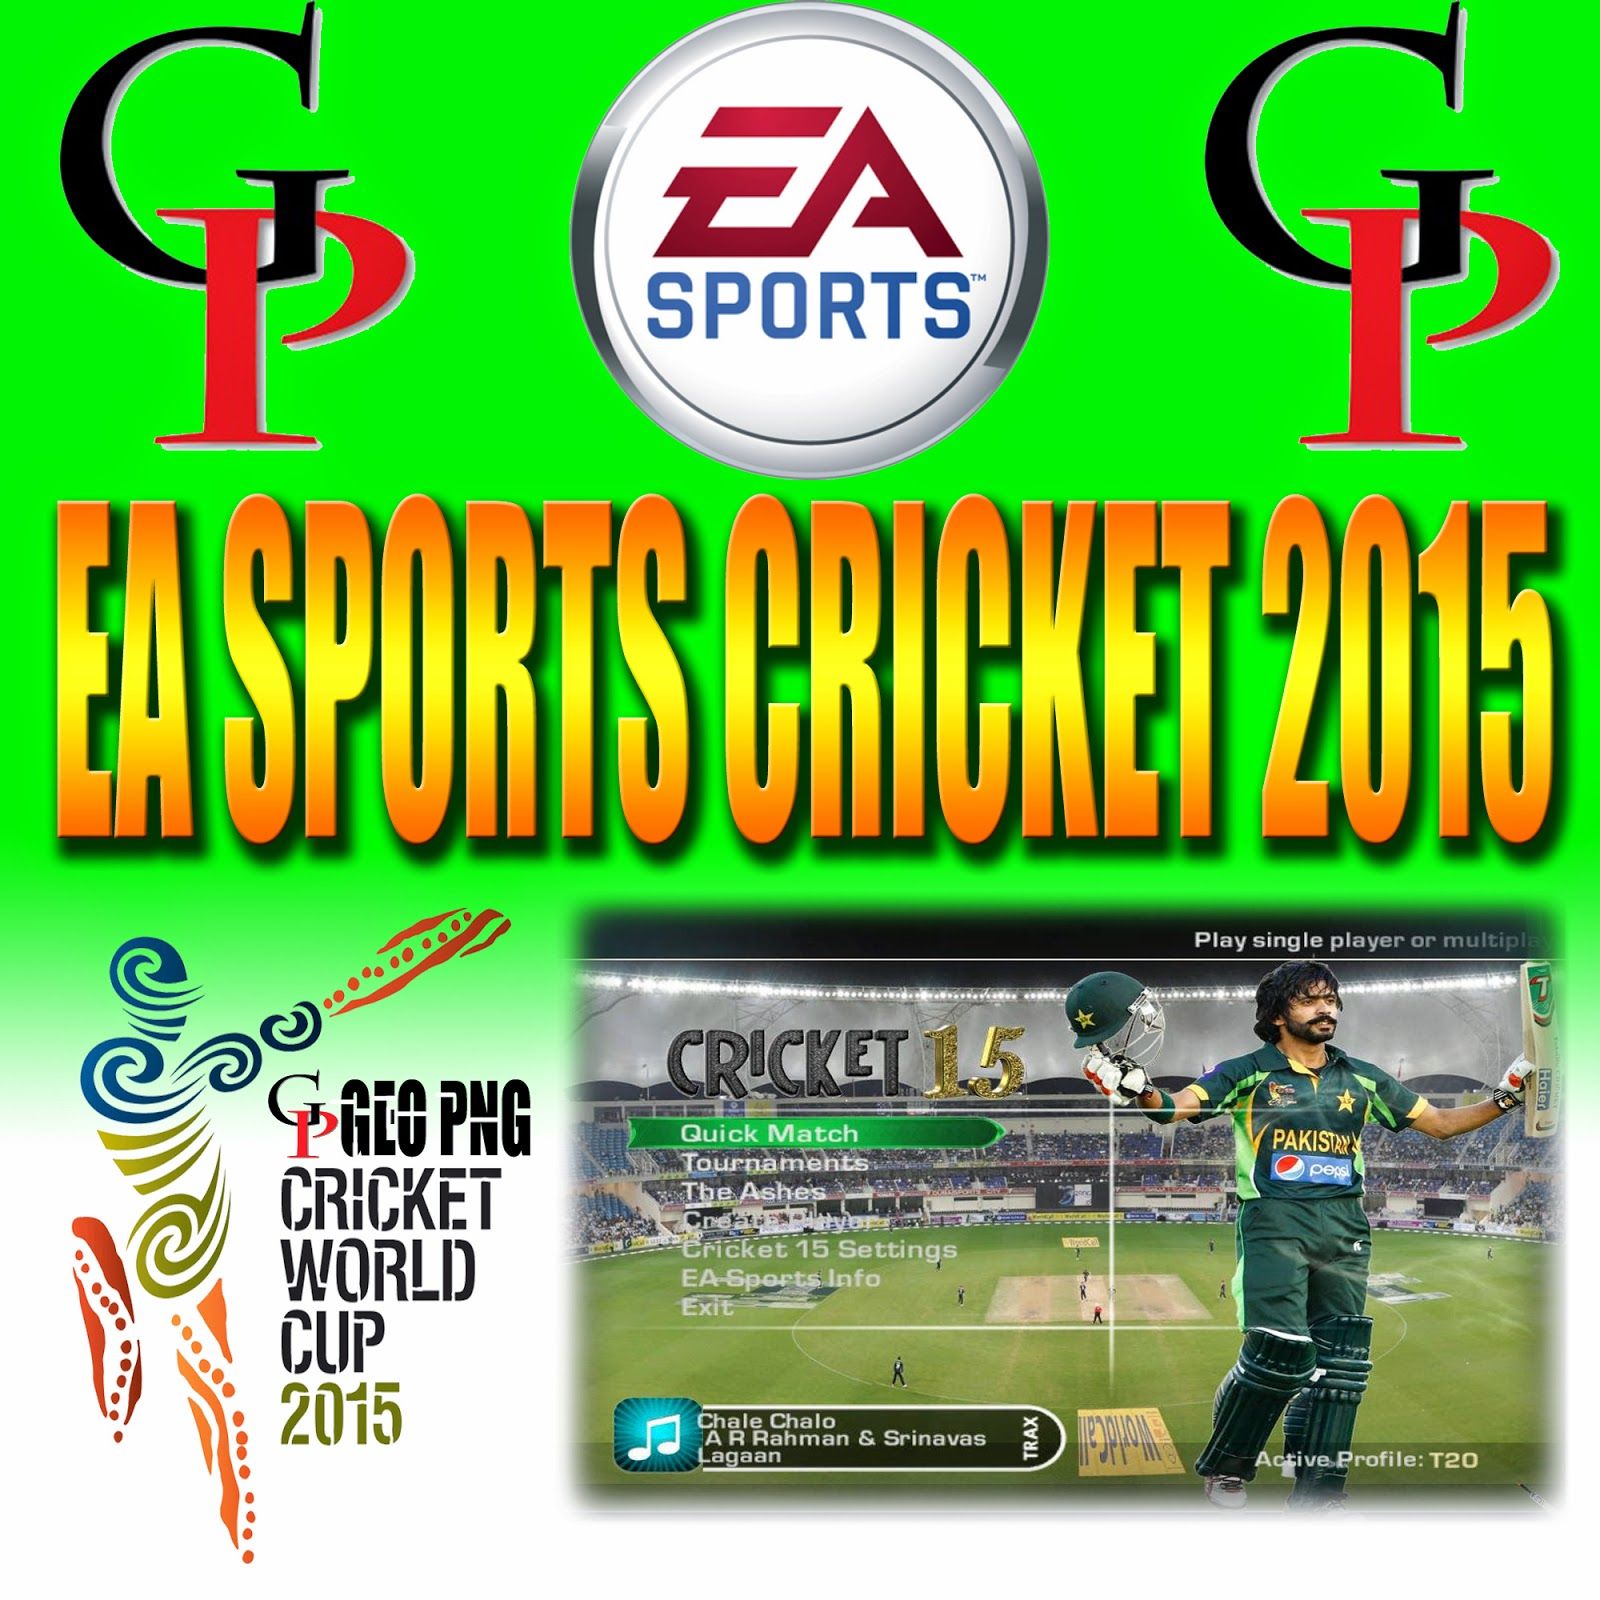 Ea sports cricket 2016 free download for pc windows 7